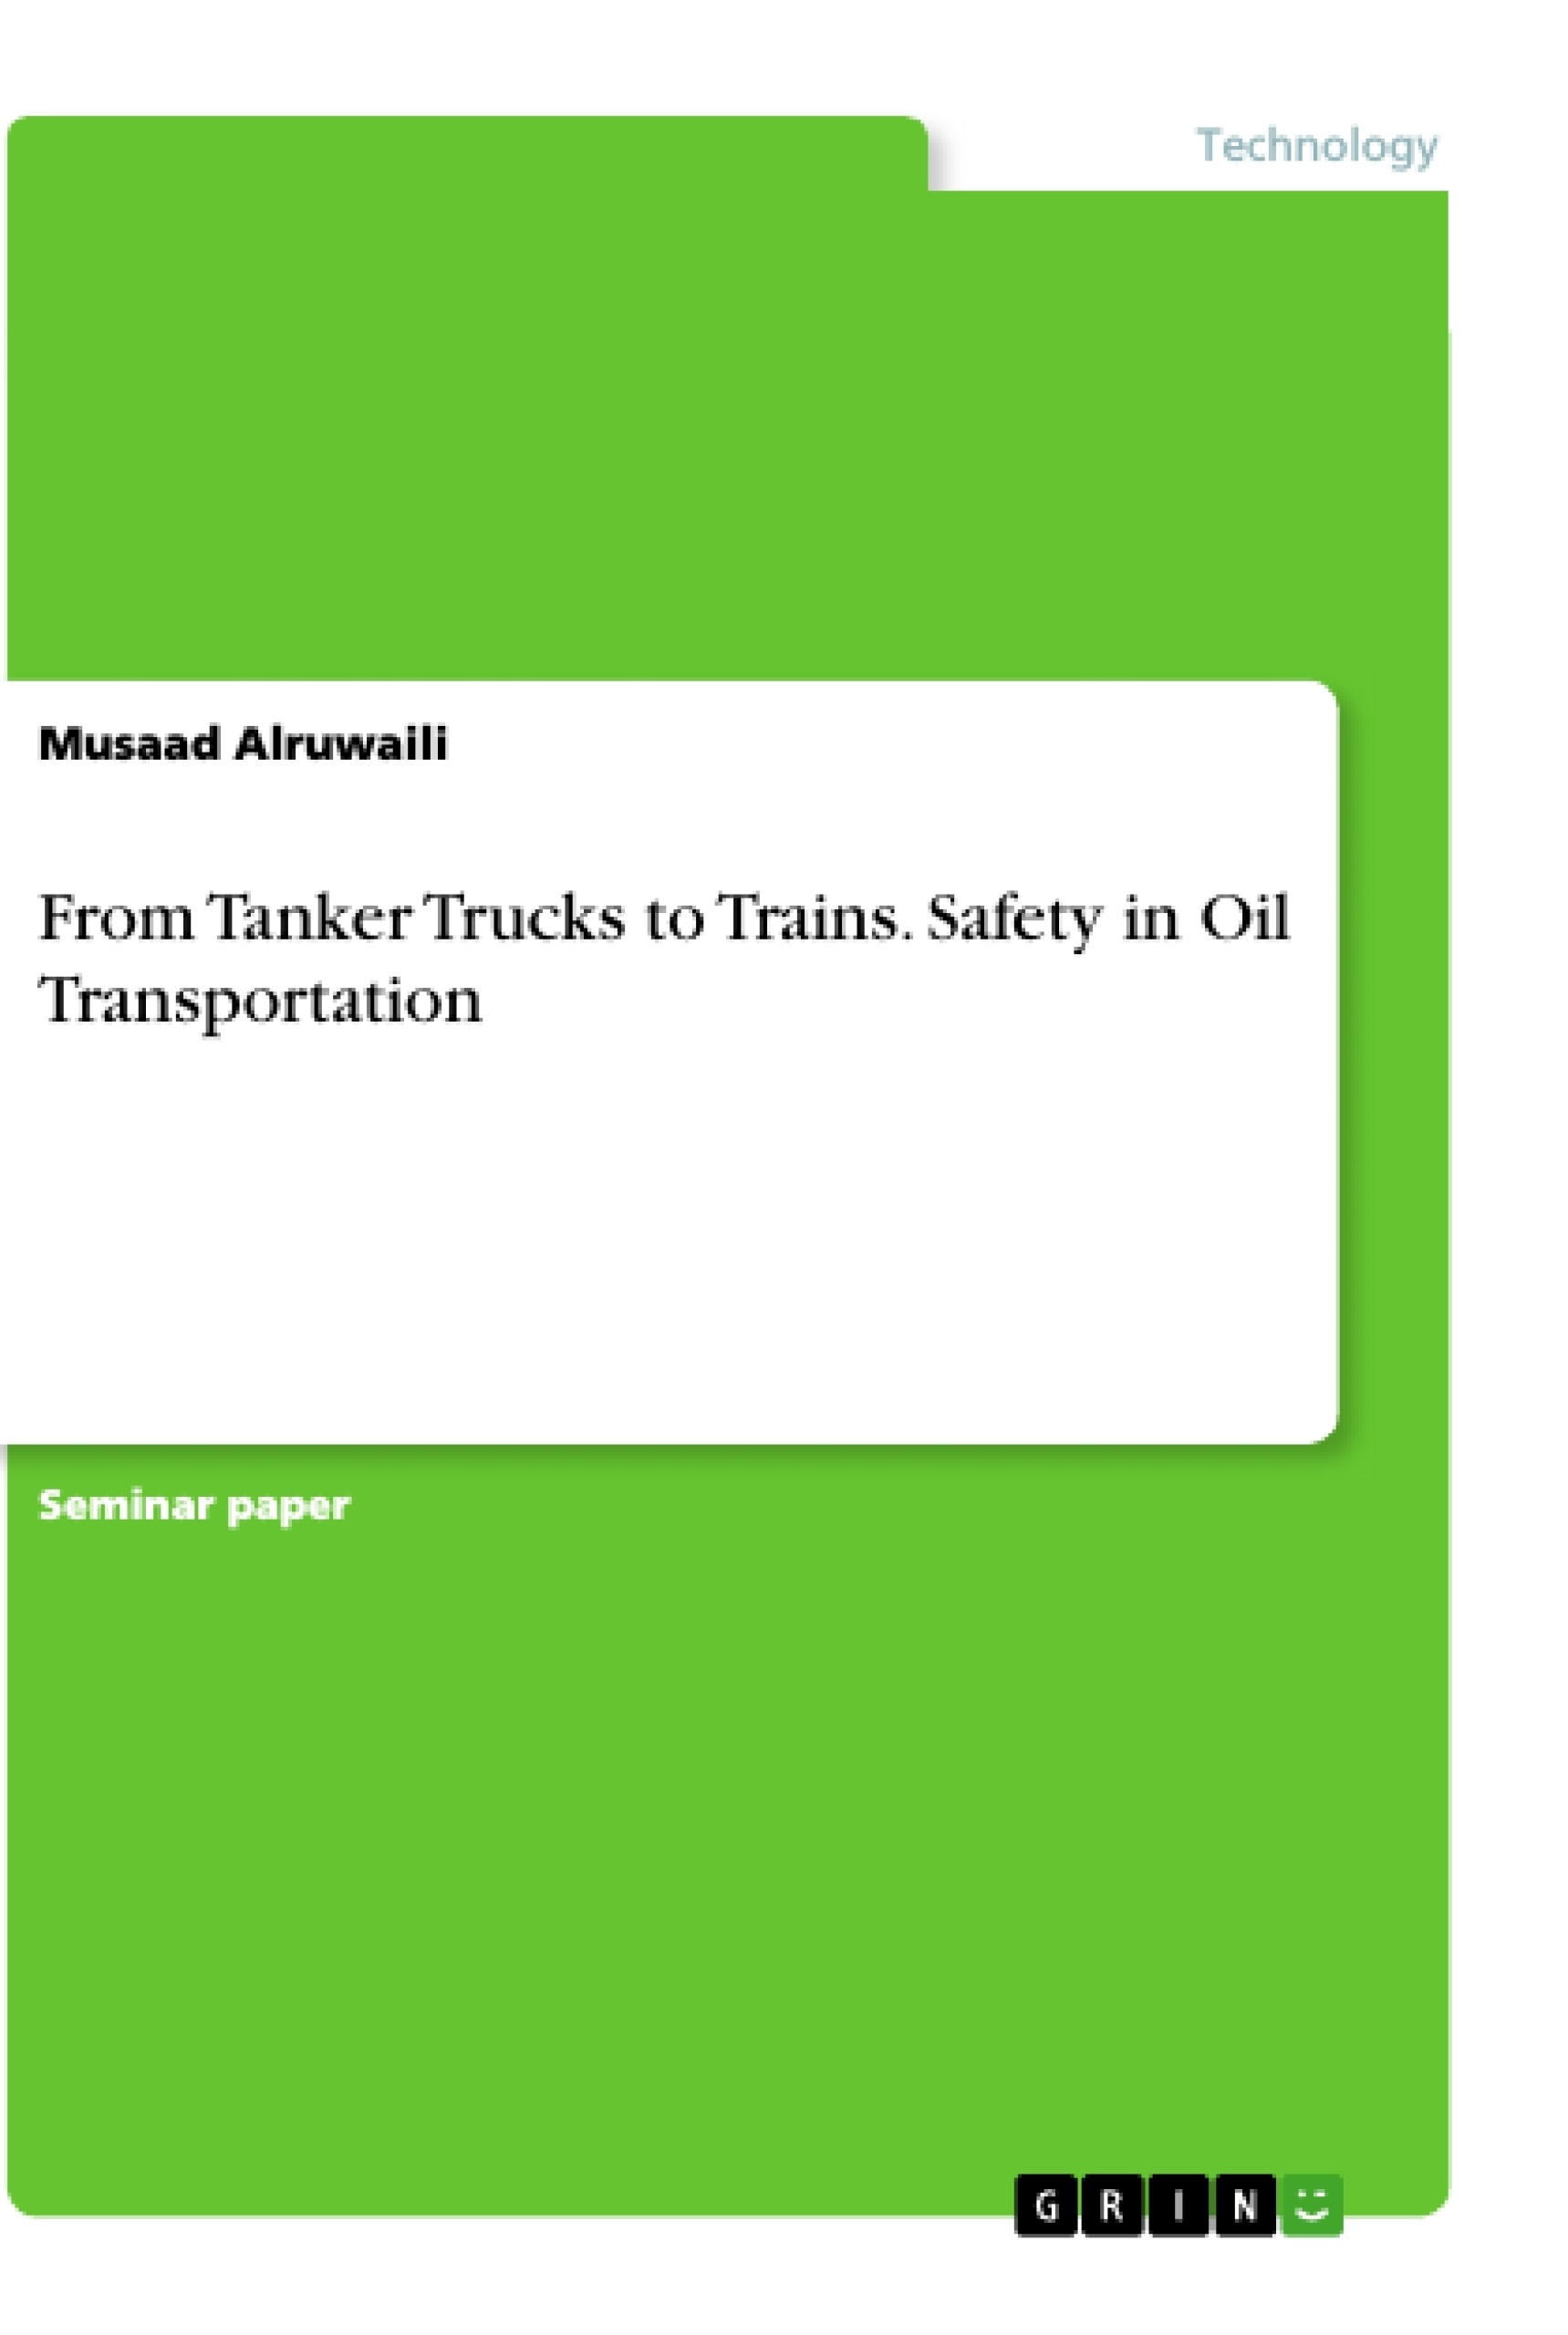 Title: From Tanker Trucks to Trains. Safety in Oil Transportation